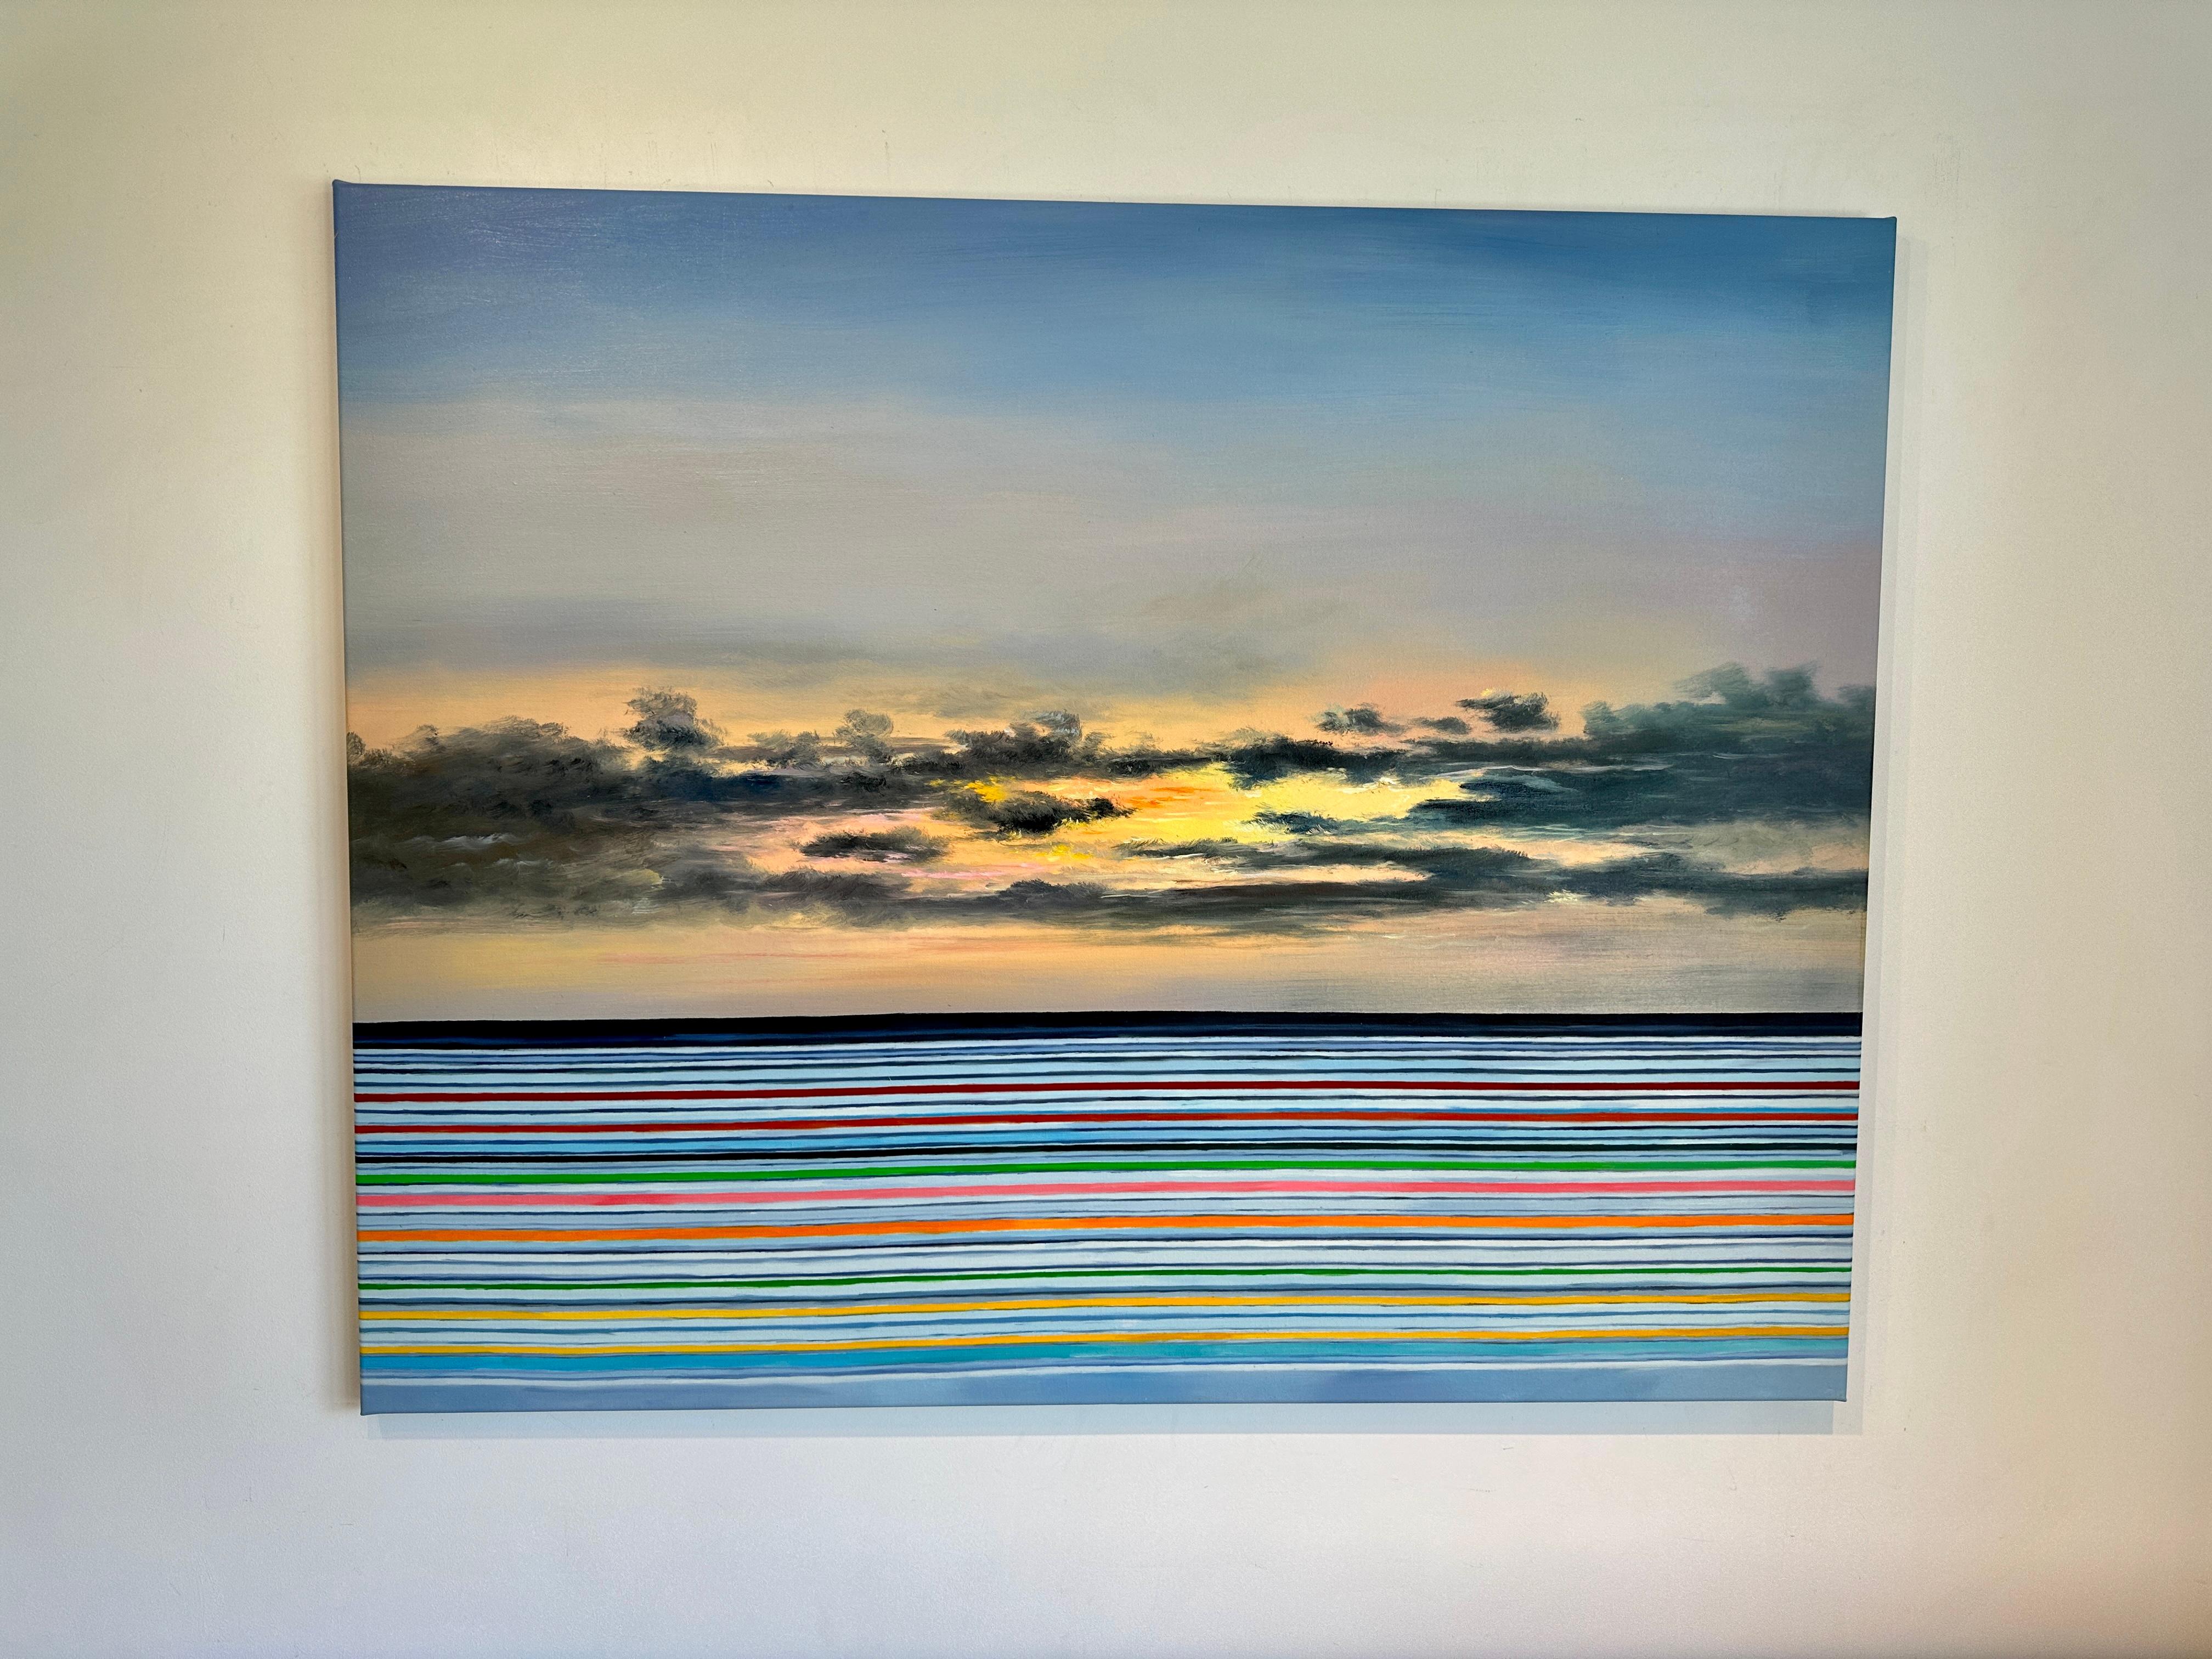 The Sunlight Clasps the Sea by Kate Seaborne -Sunset Oil Ocean Seascape Painting For Sale 8